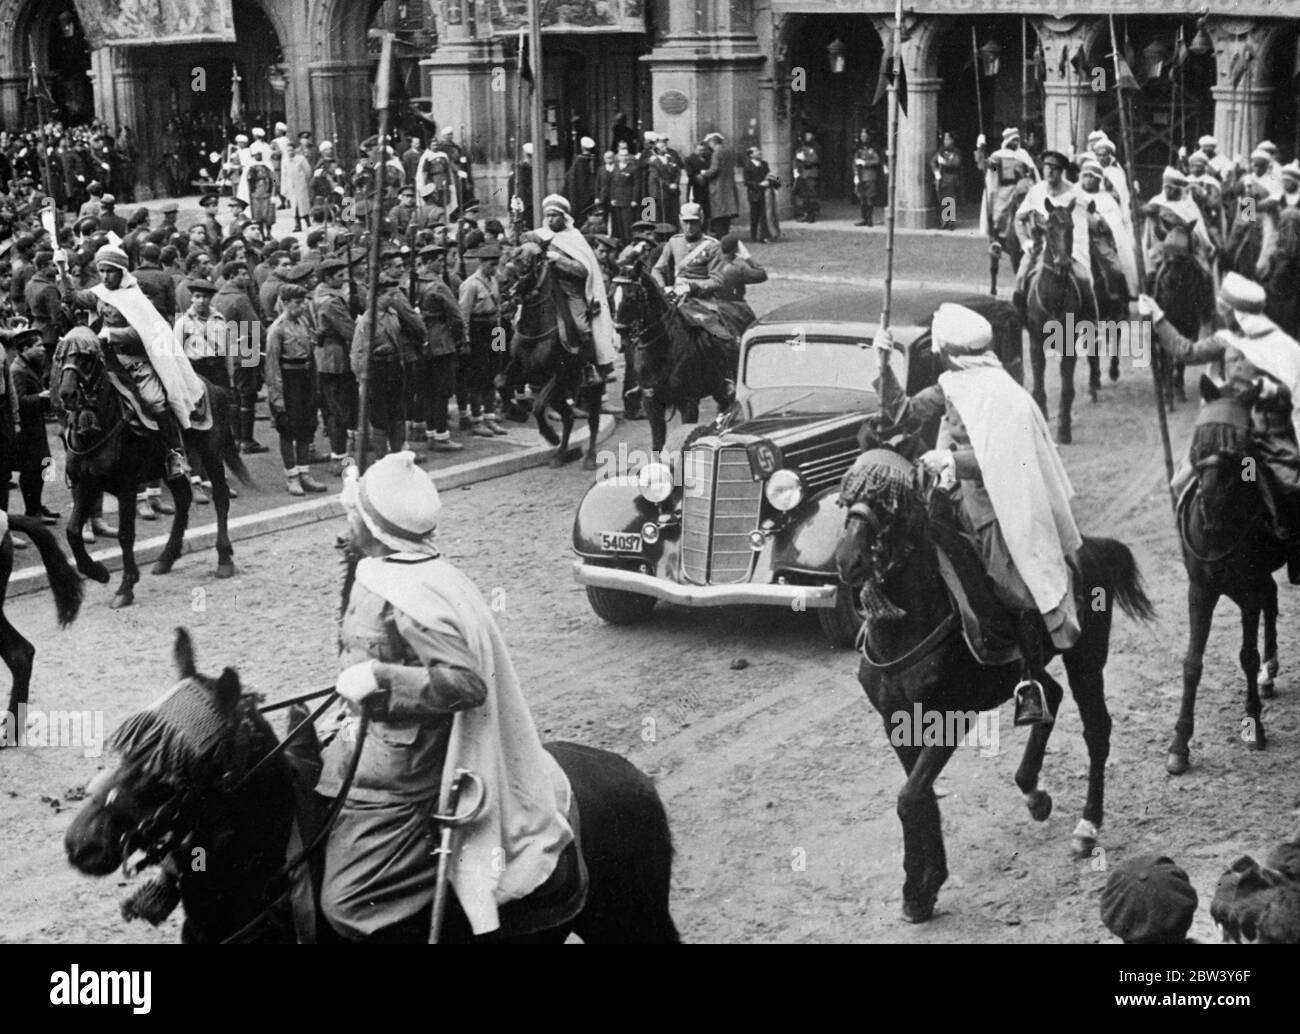 Franco and Moorish cavalcade pass through Salamanca . Escorted by his specially selected Moorish bodyguard , who on horseback , General Franco , head of the insurgents Spanish Government , drove through Salamanca to receive the credentials of the German Ambassador , General Faupel , at the City Hall . The streets of the city were filled with huge crowds , spectators watching even from the balconies of buildings . Photo shows , the Moorish bodyguard surrounding General Franco ' s car as he passed through crowded Salamanca . 9 March 1937 Stock Photo